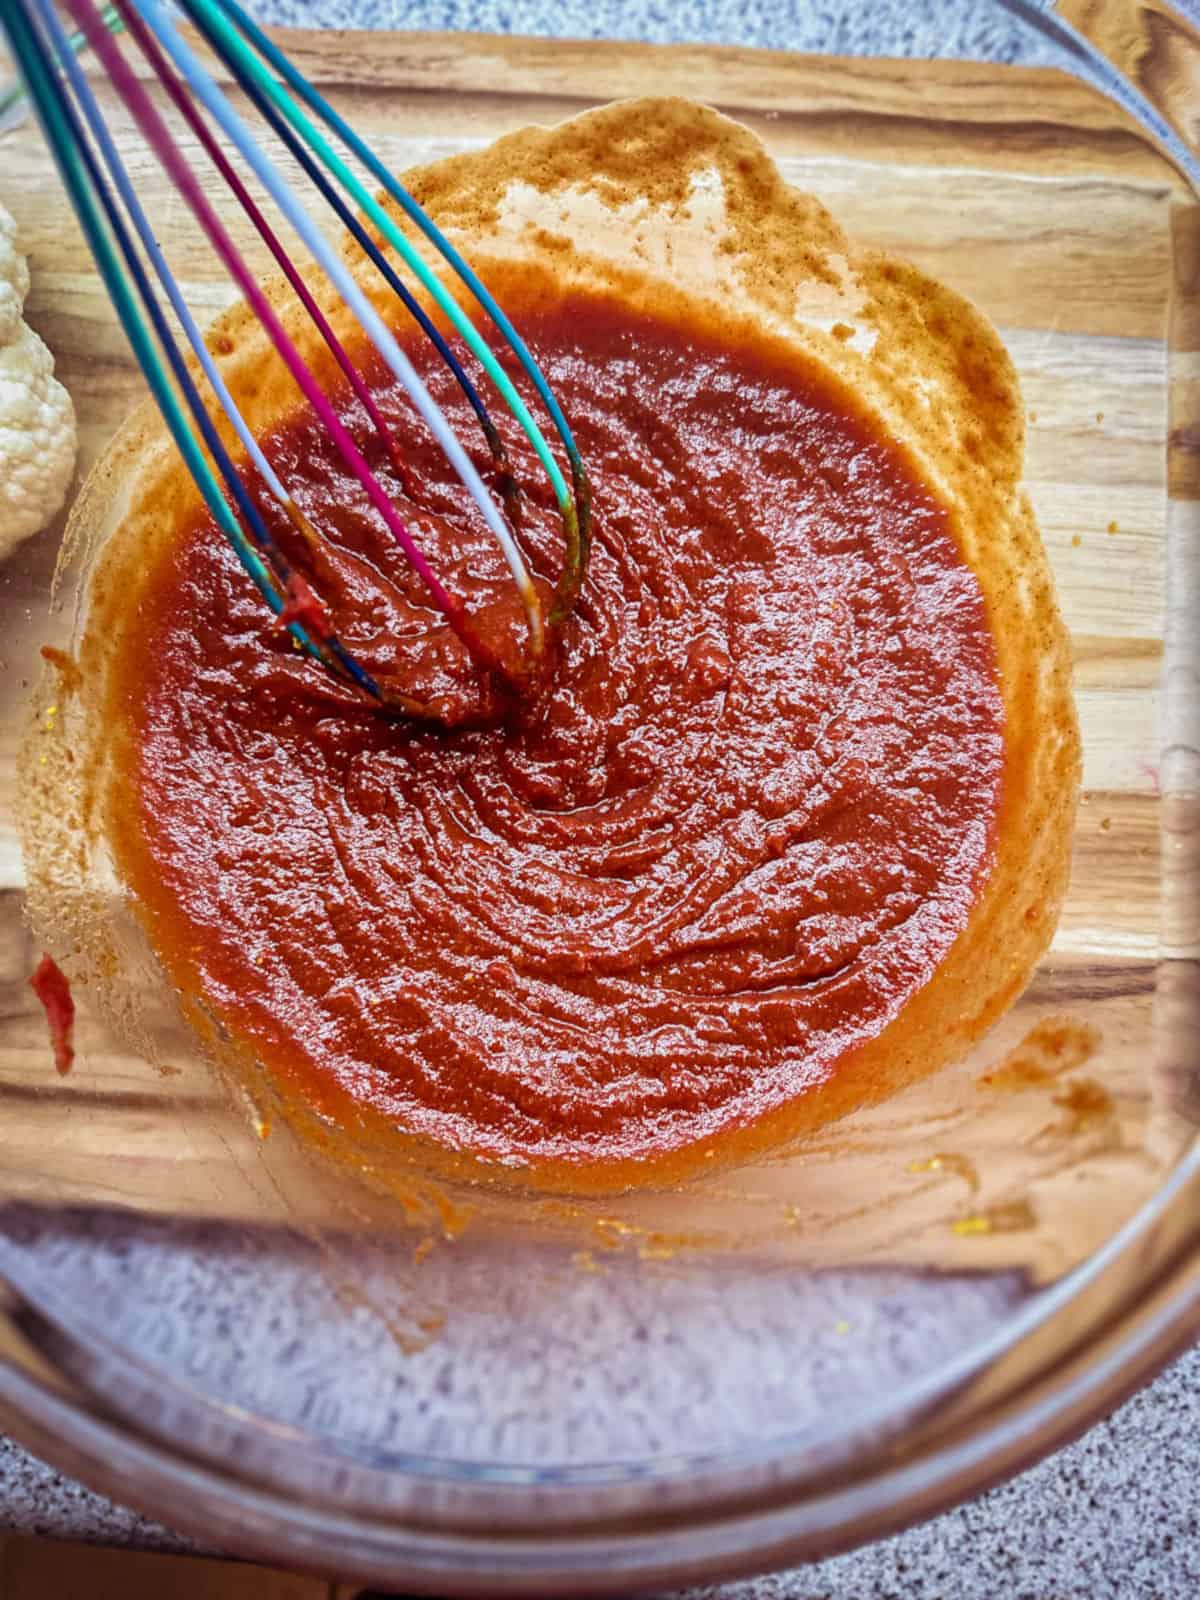 Close-up photo of barbecue sauce being mixed together in a glass mixing bowl with a multi-colored whisk. The bowl is set on a bamboo cutting board